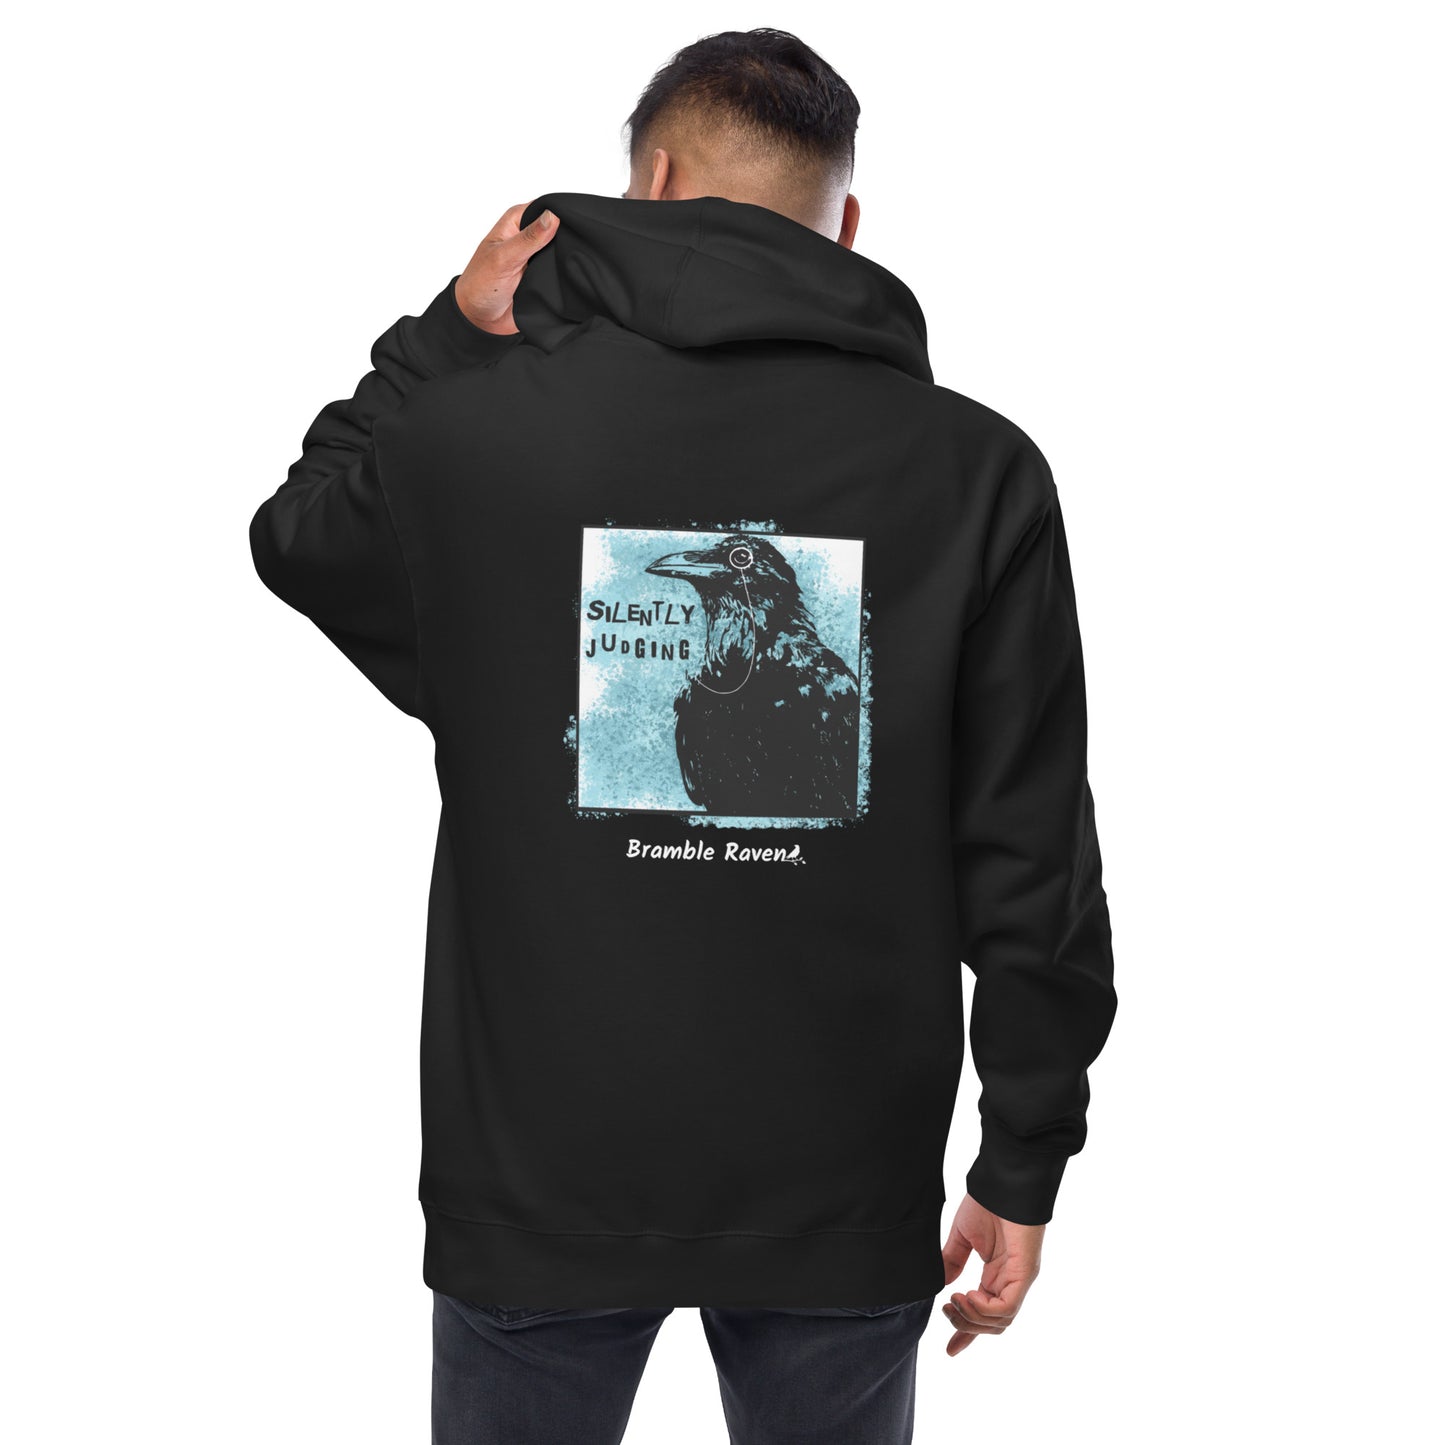 Unisex fleece-lined black colored zip-up hoodie with silently judging text by black crow wearing a monocle in a square with blue paint splatters.  Design on the back of hoodie. Shown on male model.